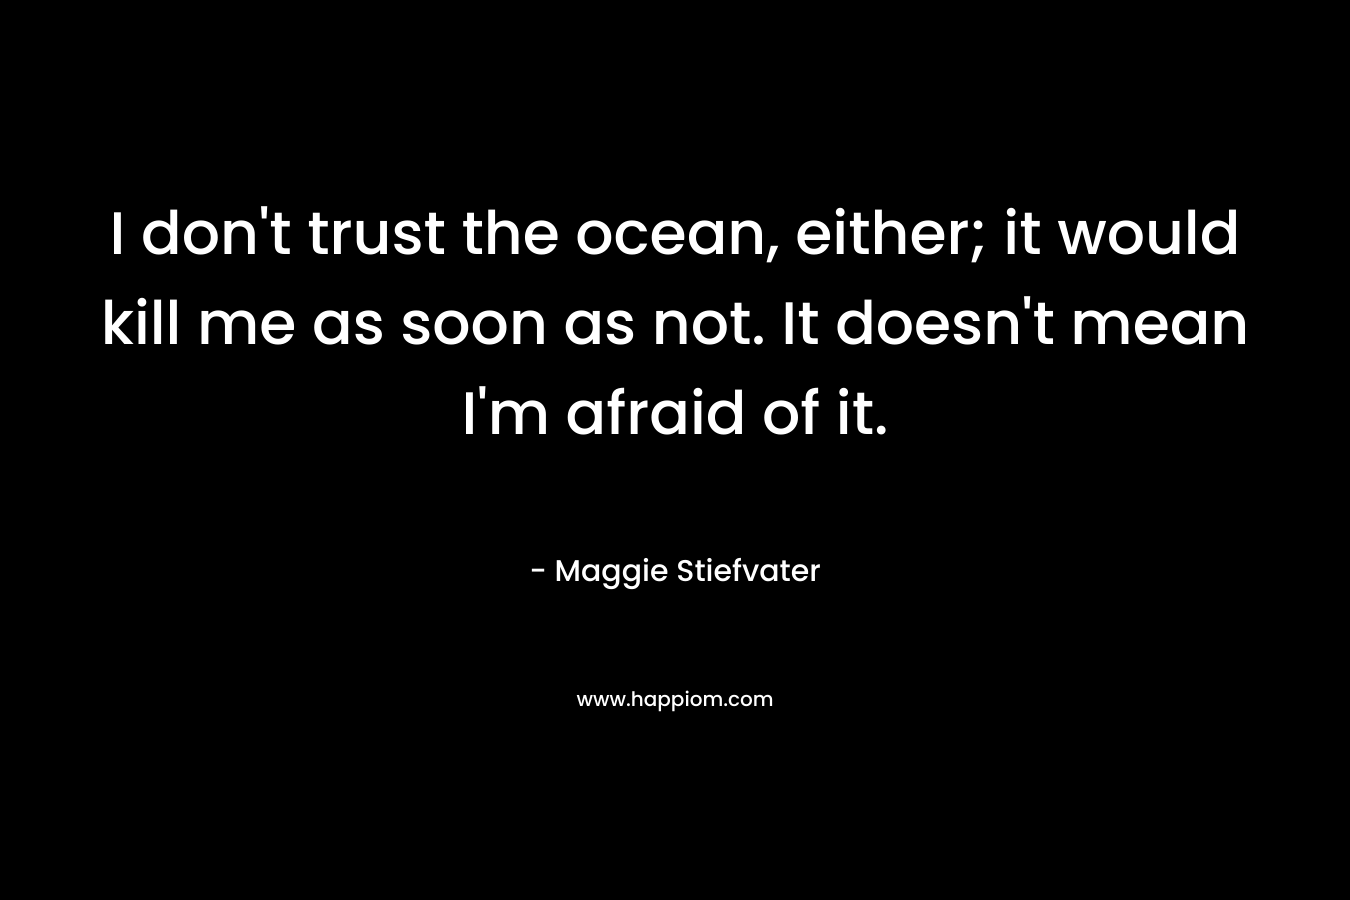 I don't trust the ocean, either; it would kill me as soon as not. It doesn't mean I'm afraid of it.